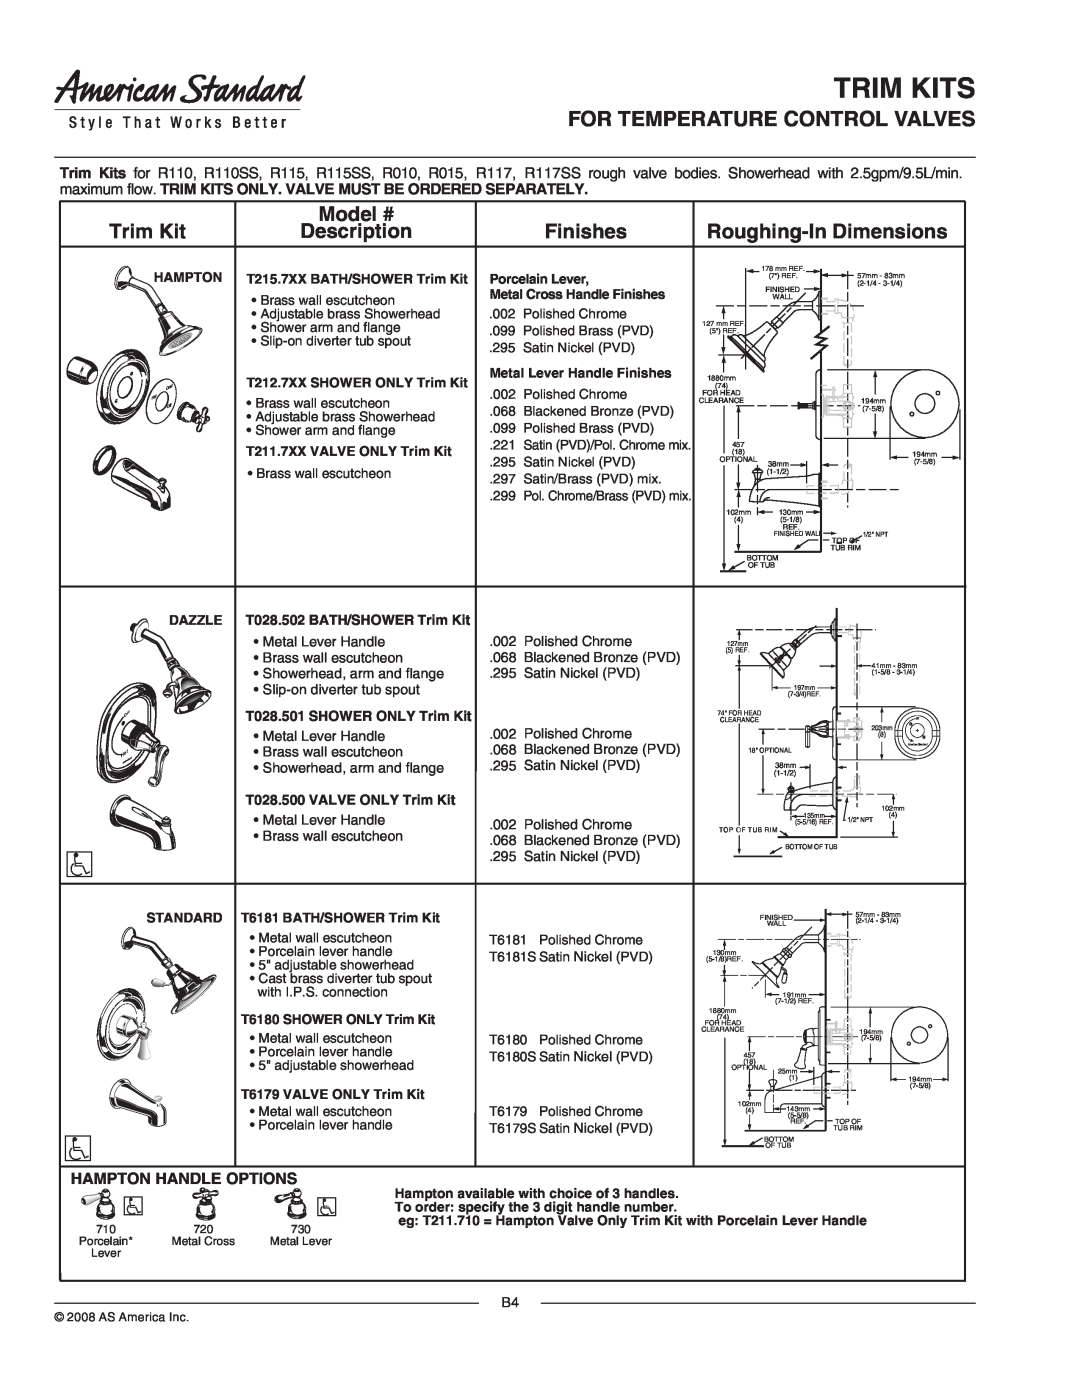 American Standard T372.128, T375.128 Trim Kits, For Temperature Control Valves, Model #, Finishes, Roughing-In Dimensions 